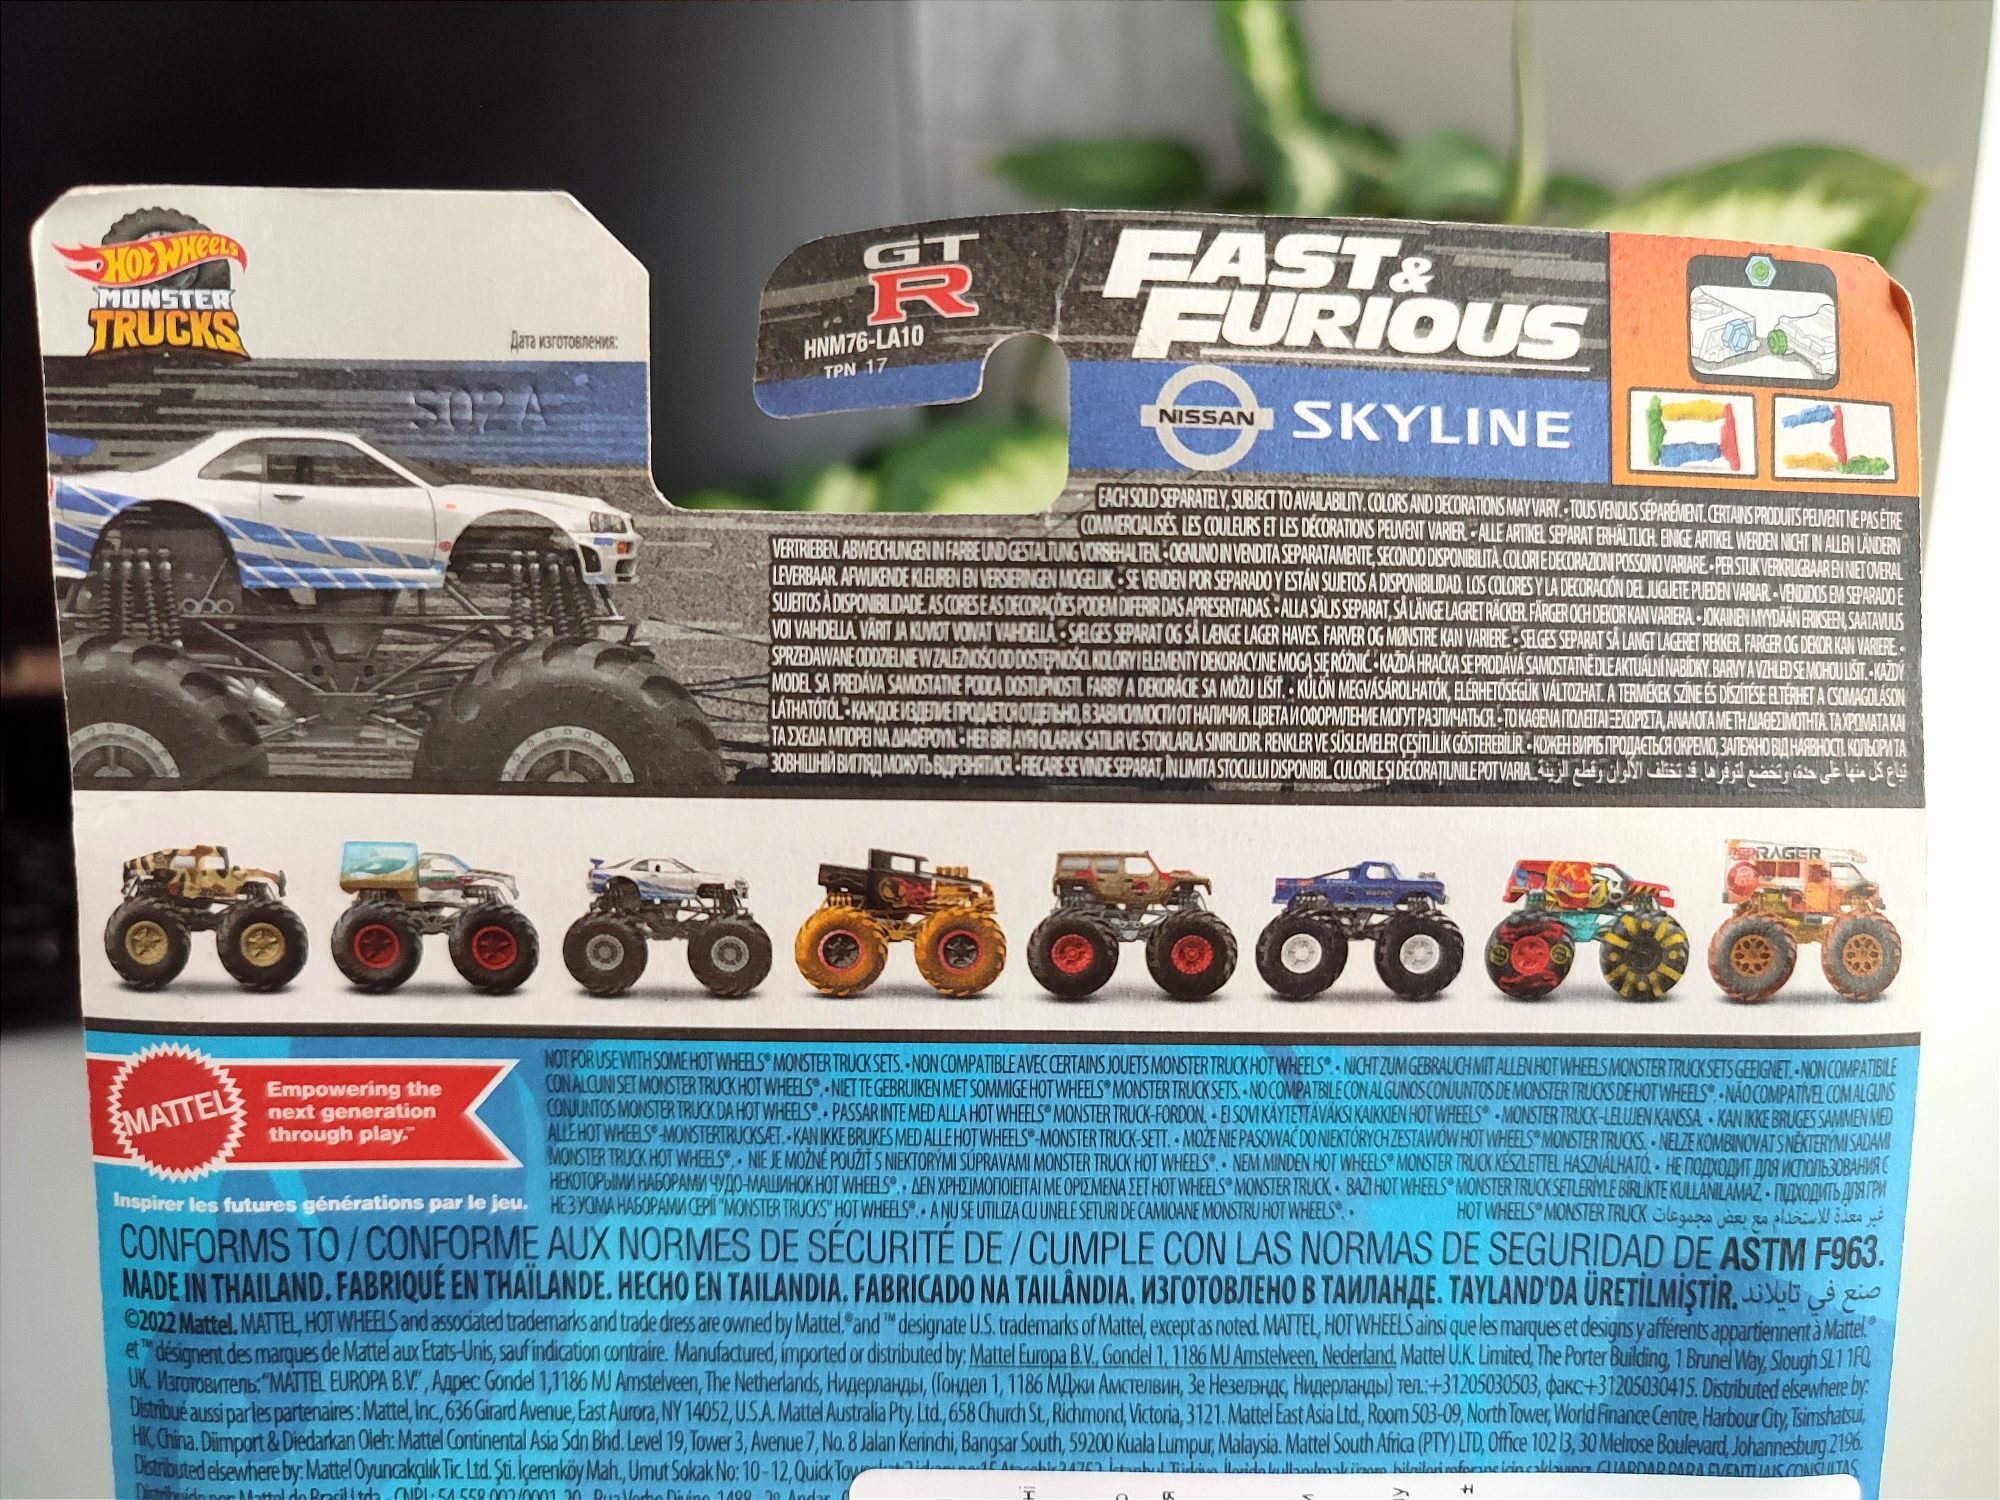 Hot wheels Nissan Skyline GT-R Fast and Furious Monster Truck